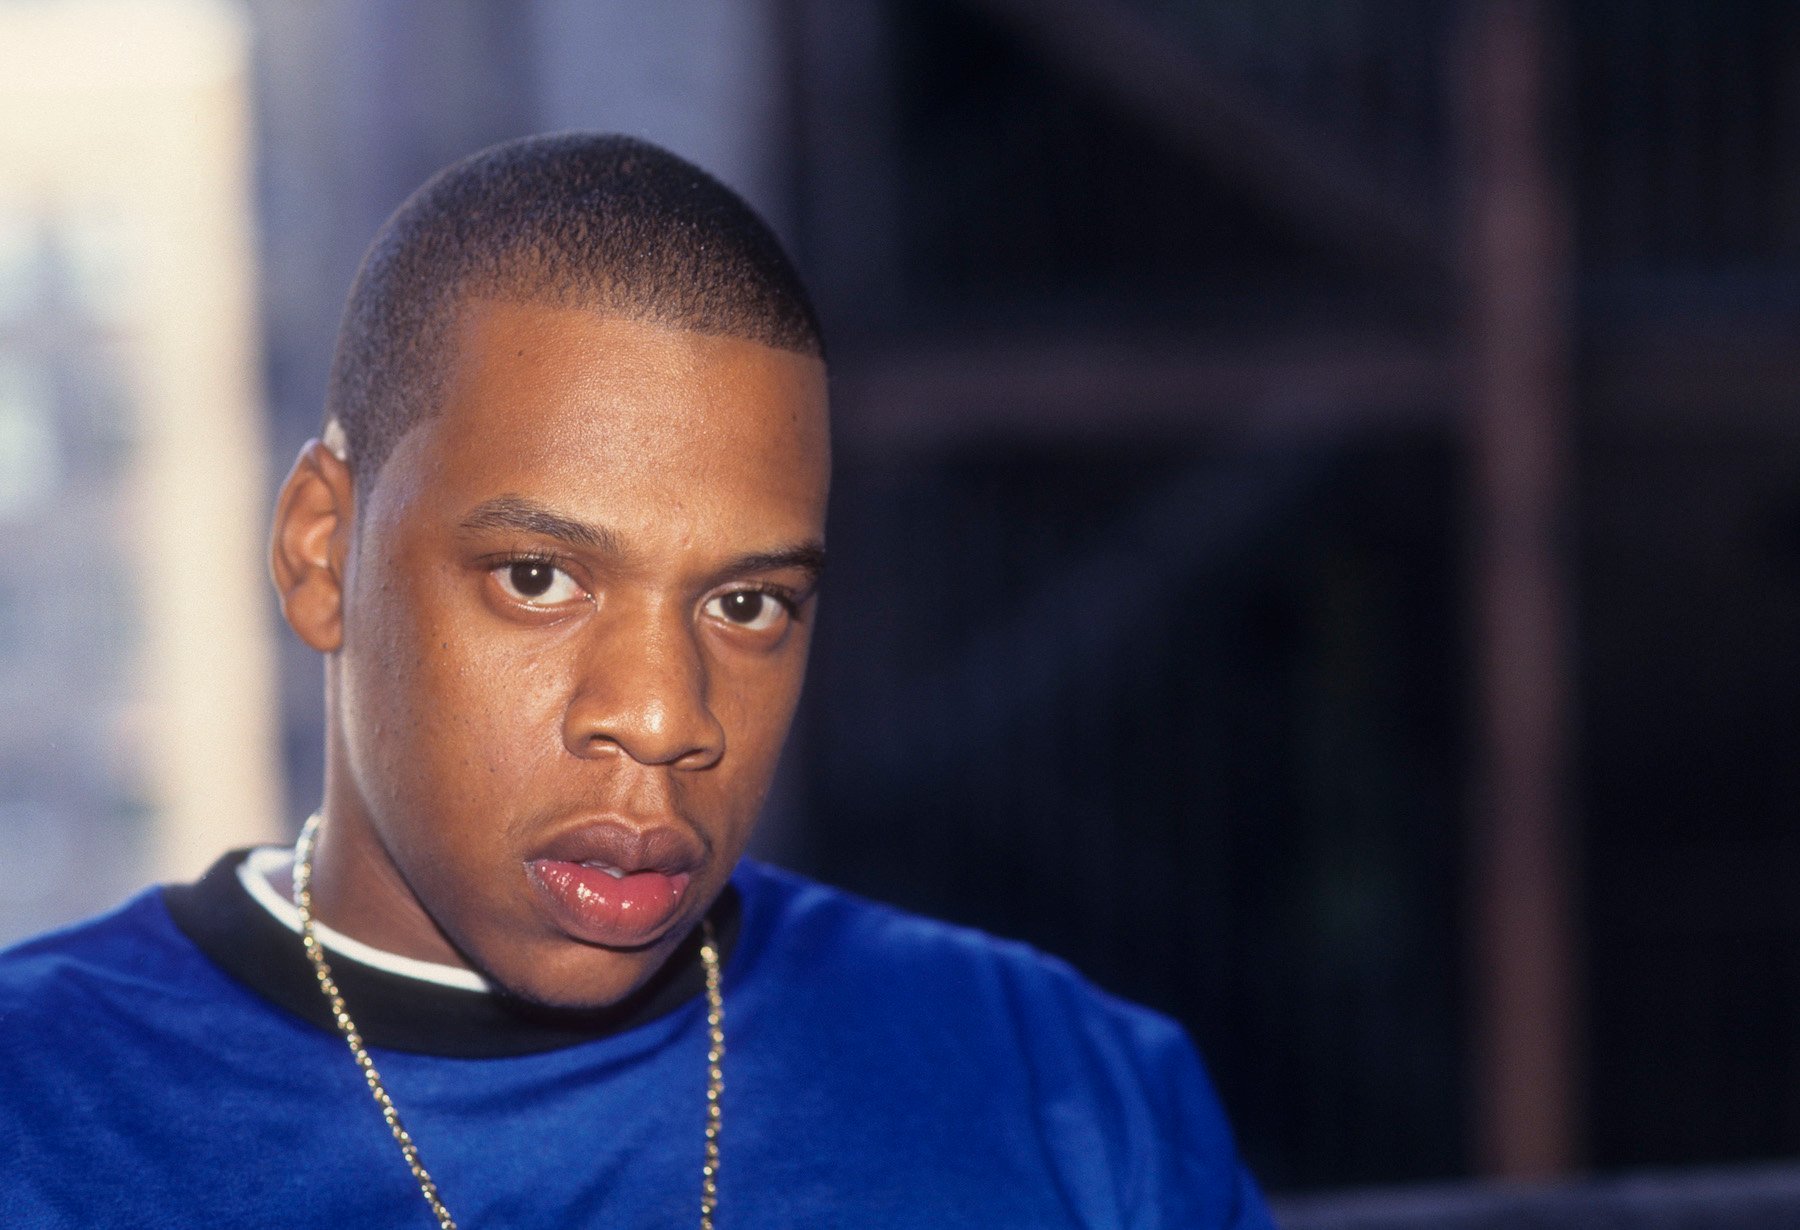 Jay-Z, who was friends with The Notorious B.I.G. before his death, pictured wearing blue